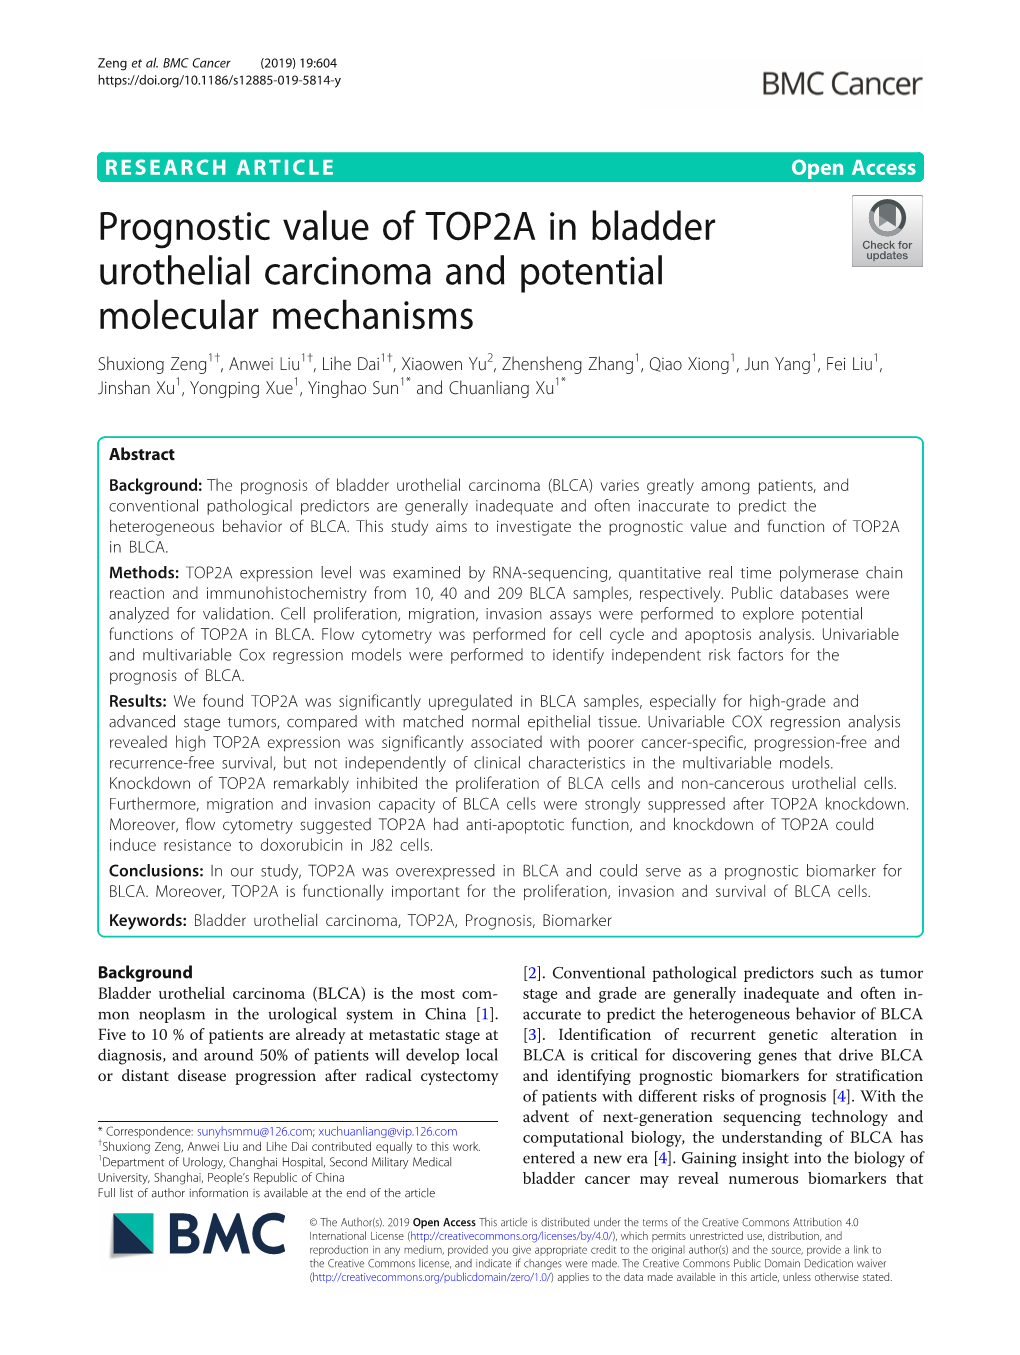 Prognostic Value of TOP2A in Bladder Urothelial Carcinoma and Potential Molecular Mechanisms